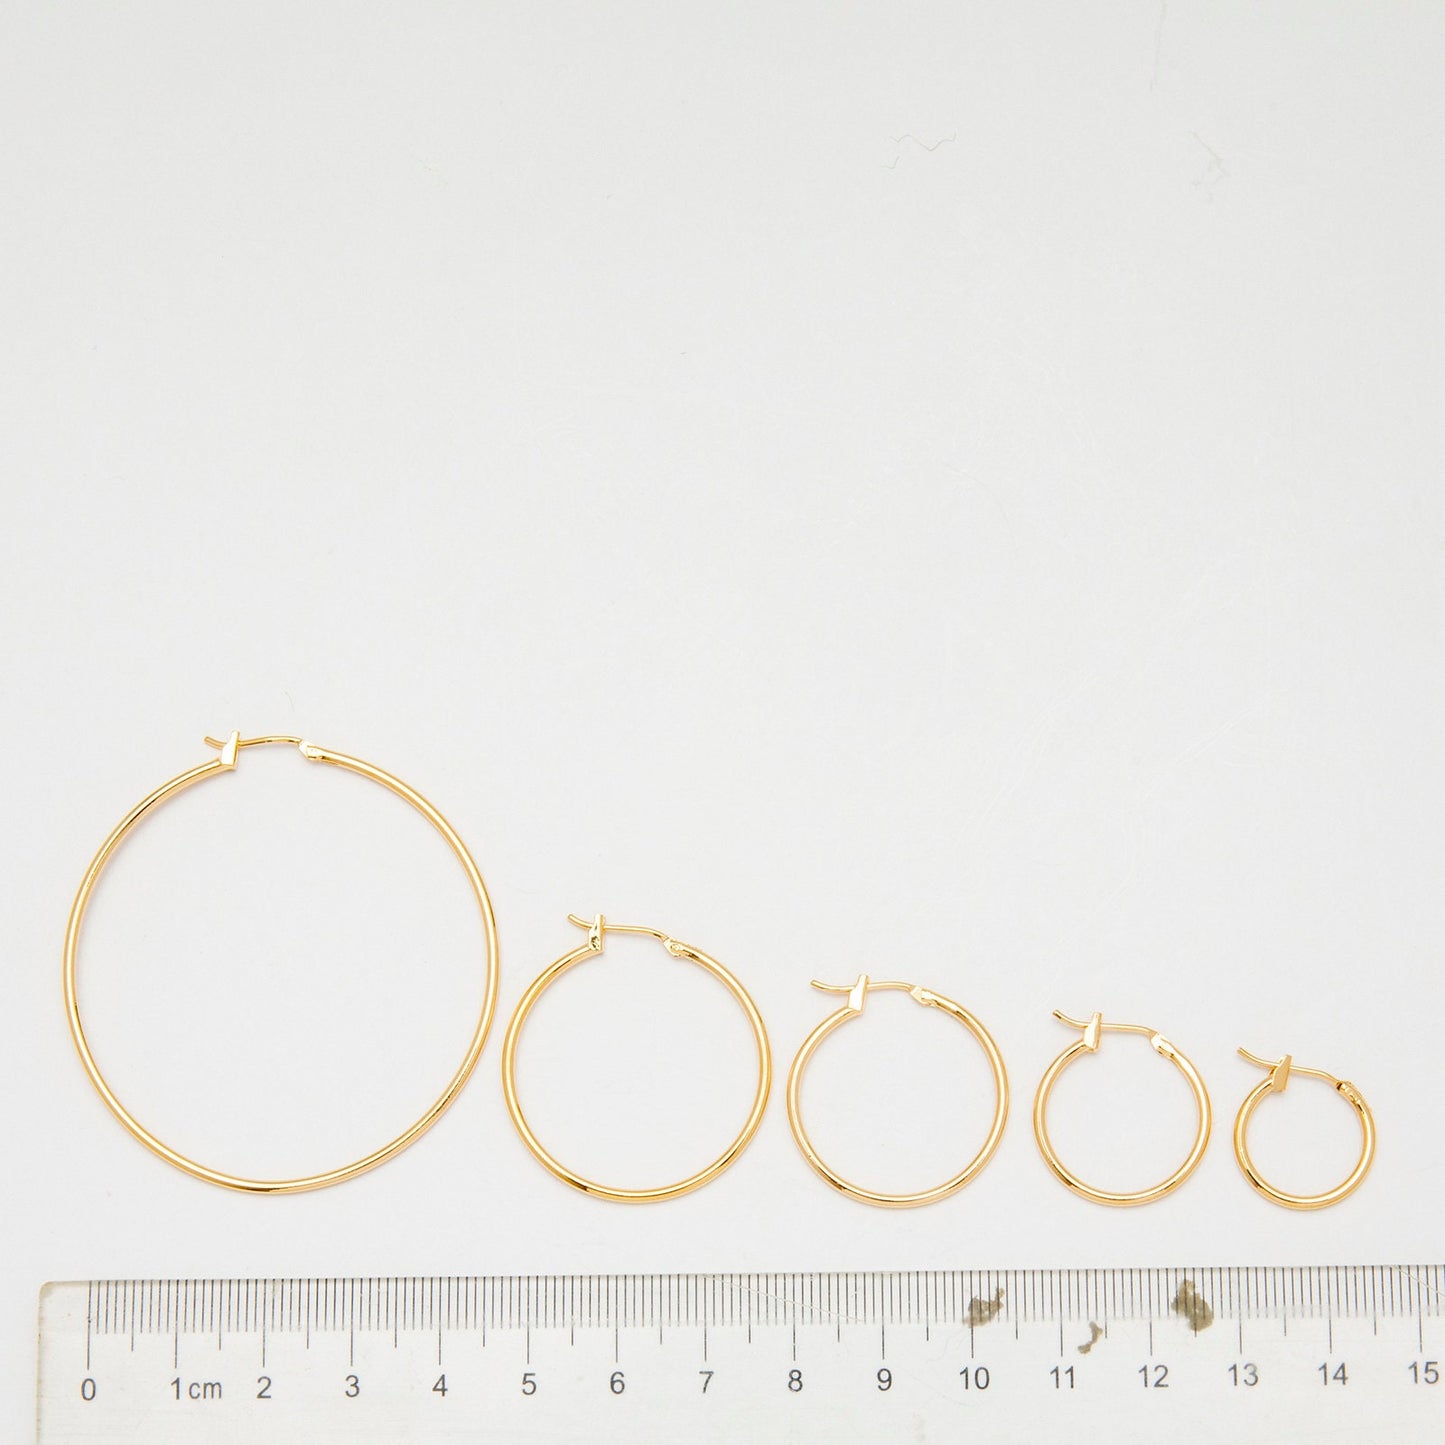 Round Plain Hoop Earring Gold Filled EP 18K , Jewelry Making 5 sizes Hoop Earrings, thickness 2mm